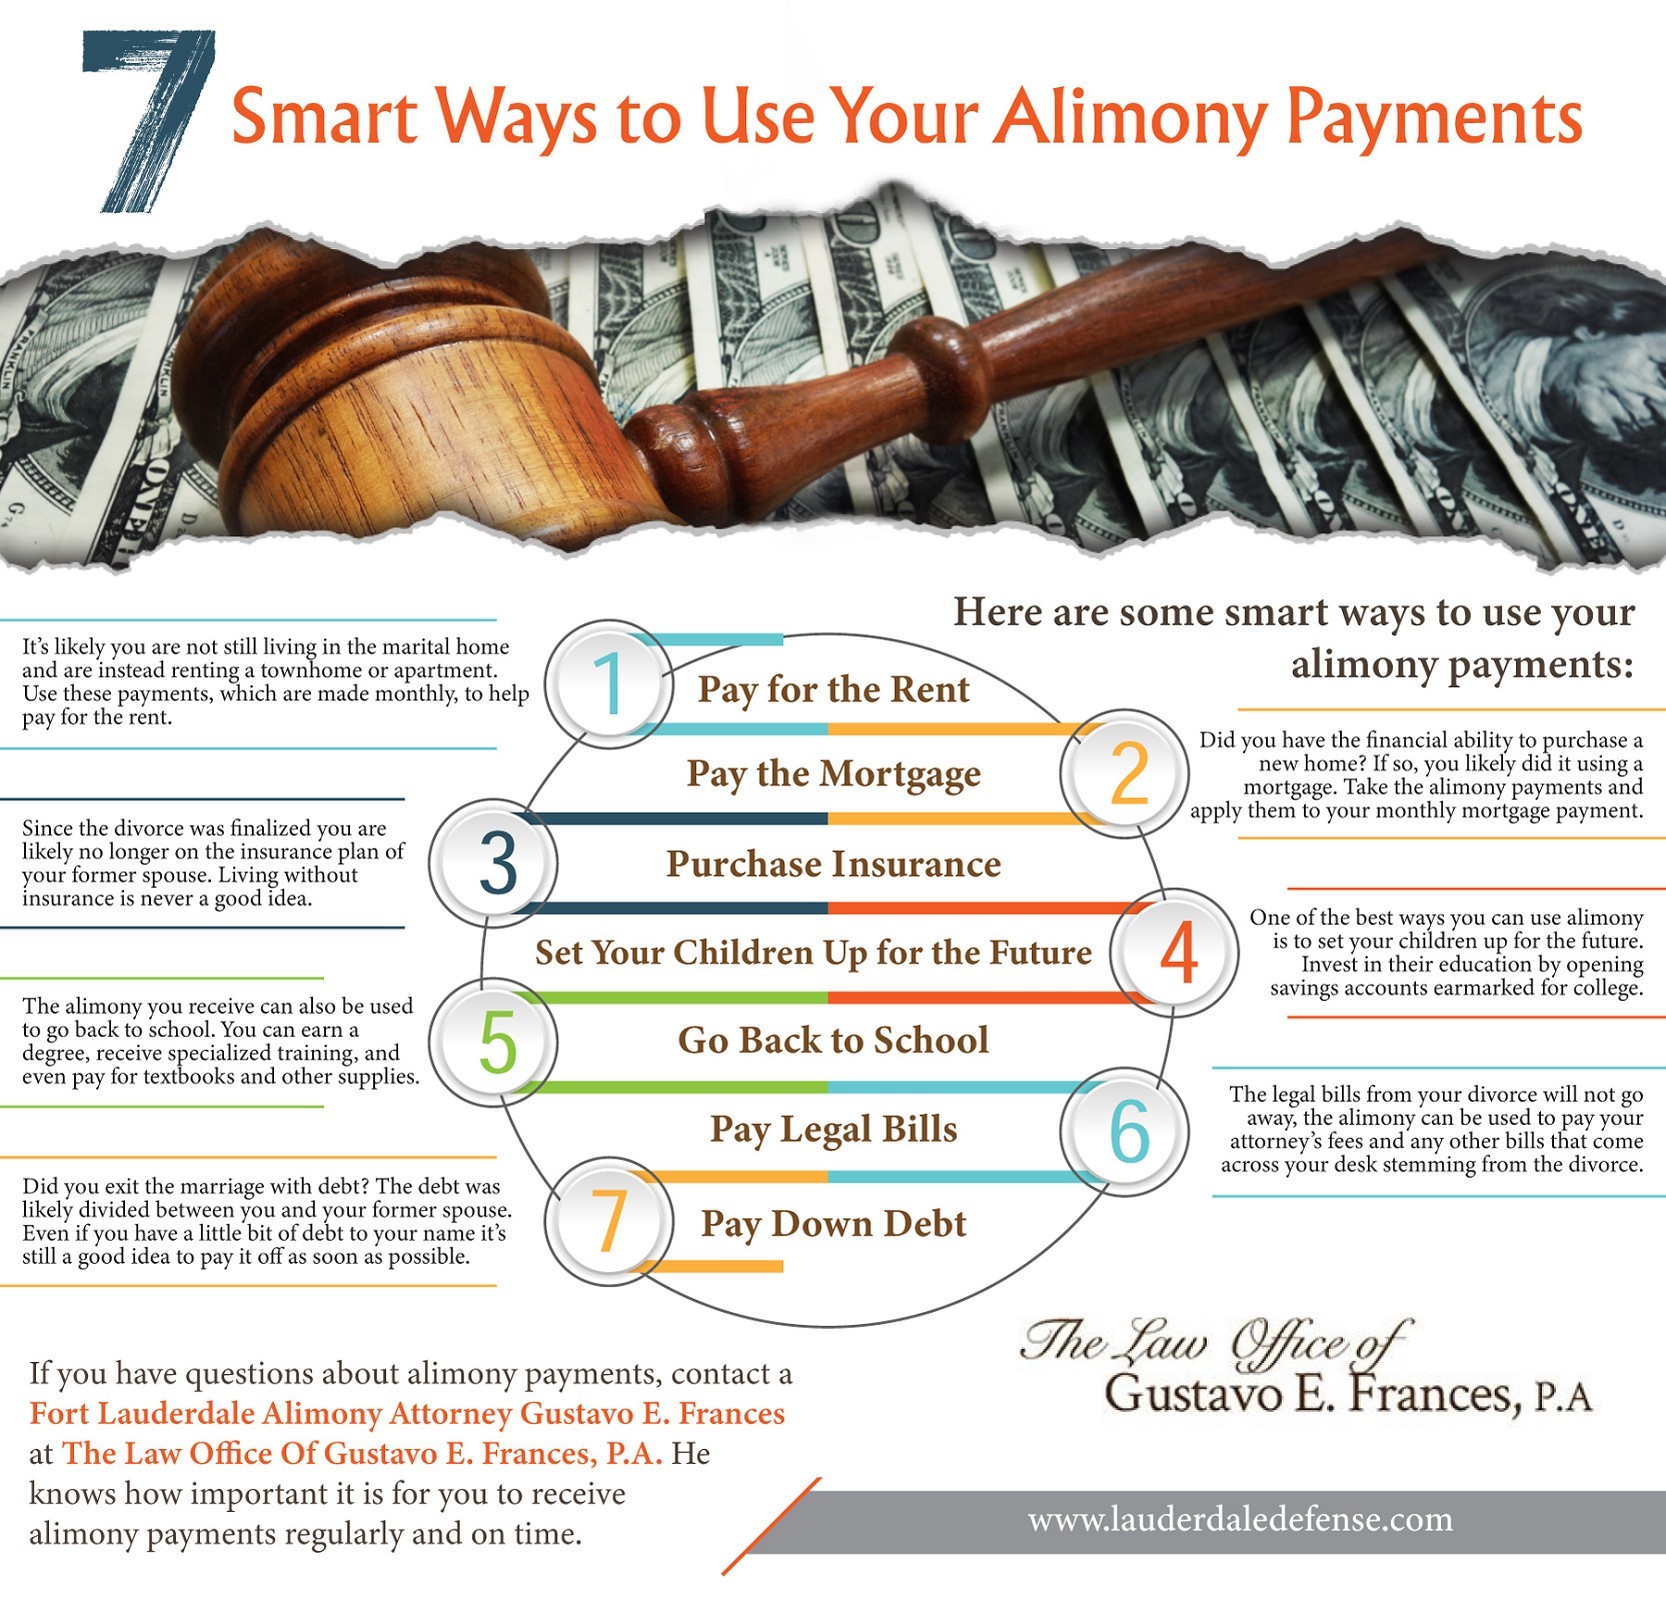 Smart Ways to Use Your Alimony Payments